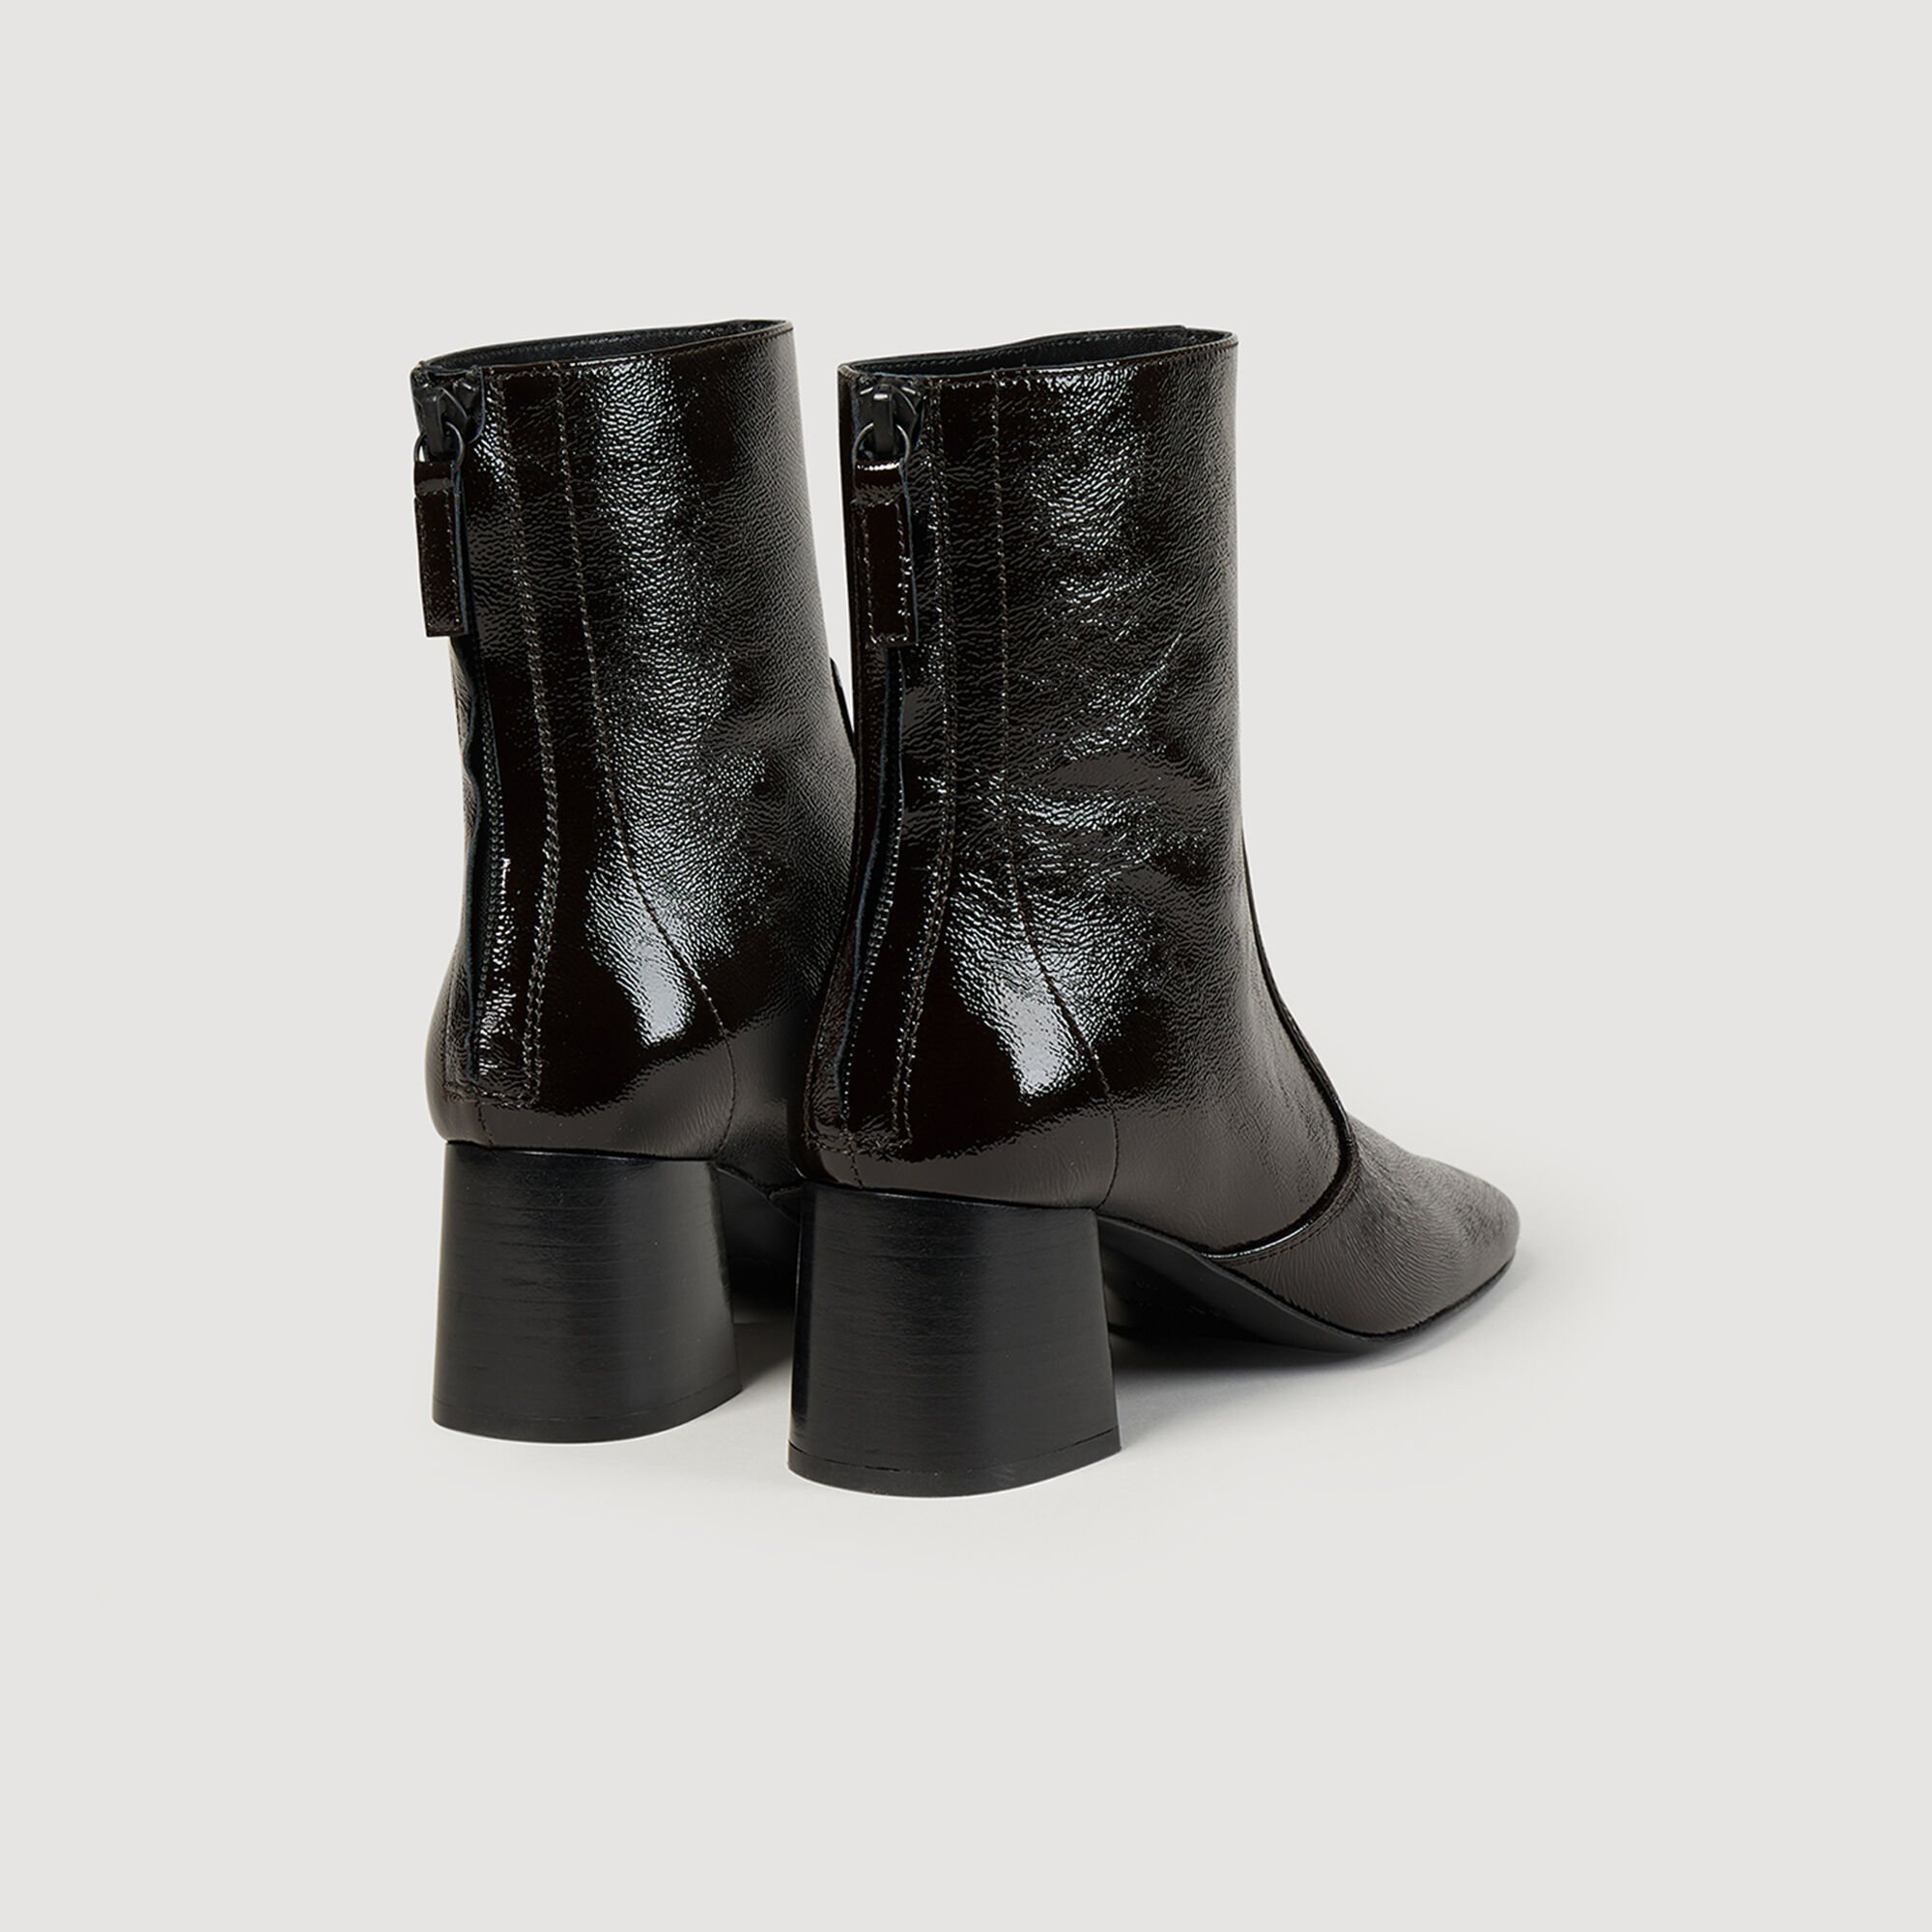 boots for Women | Official Homers® Shoes USA